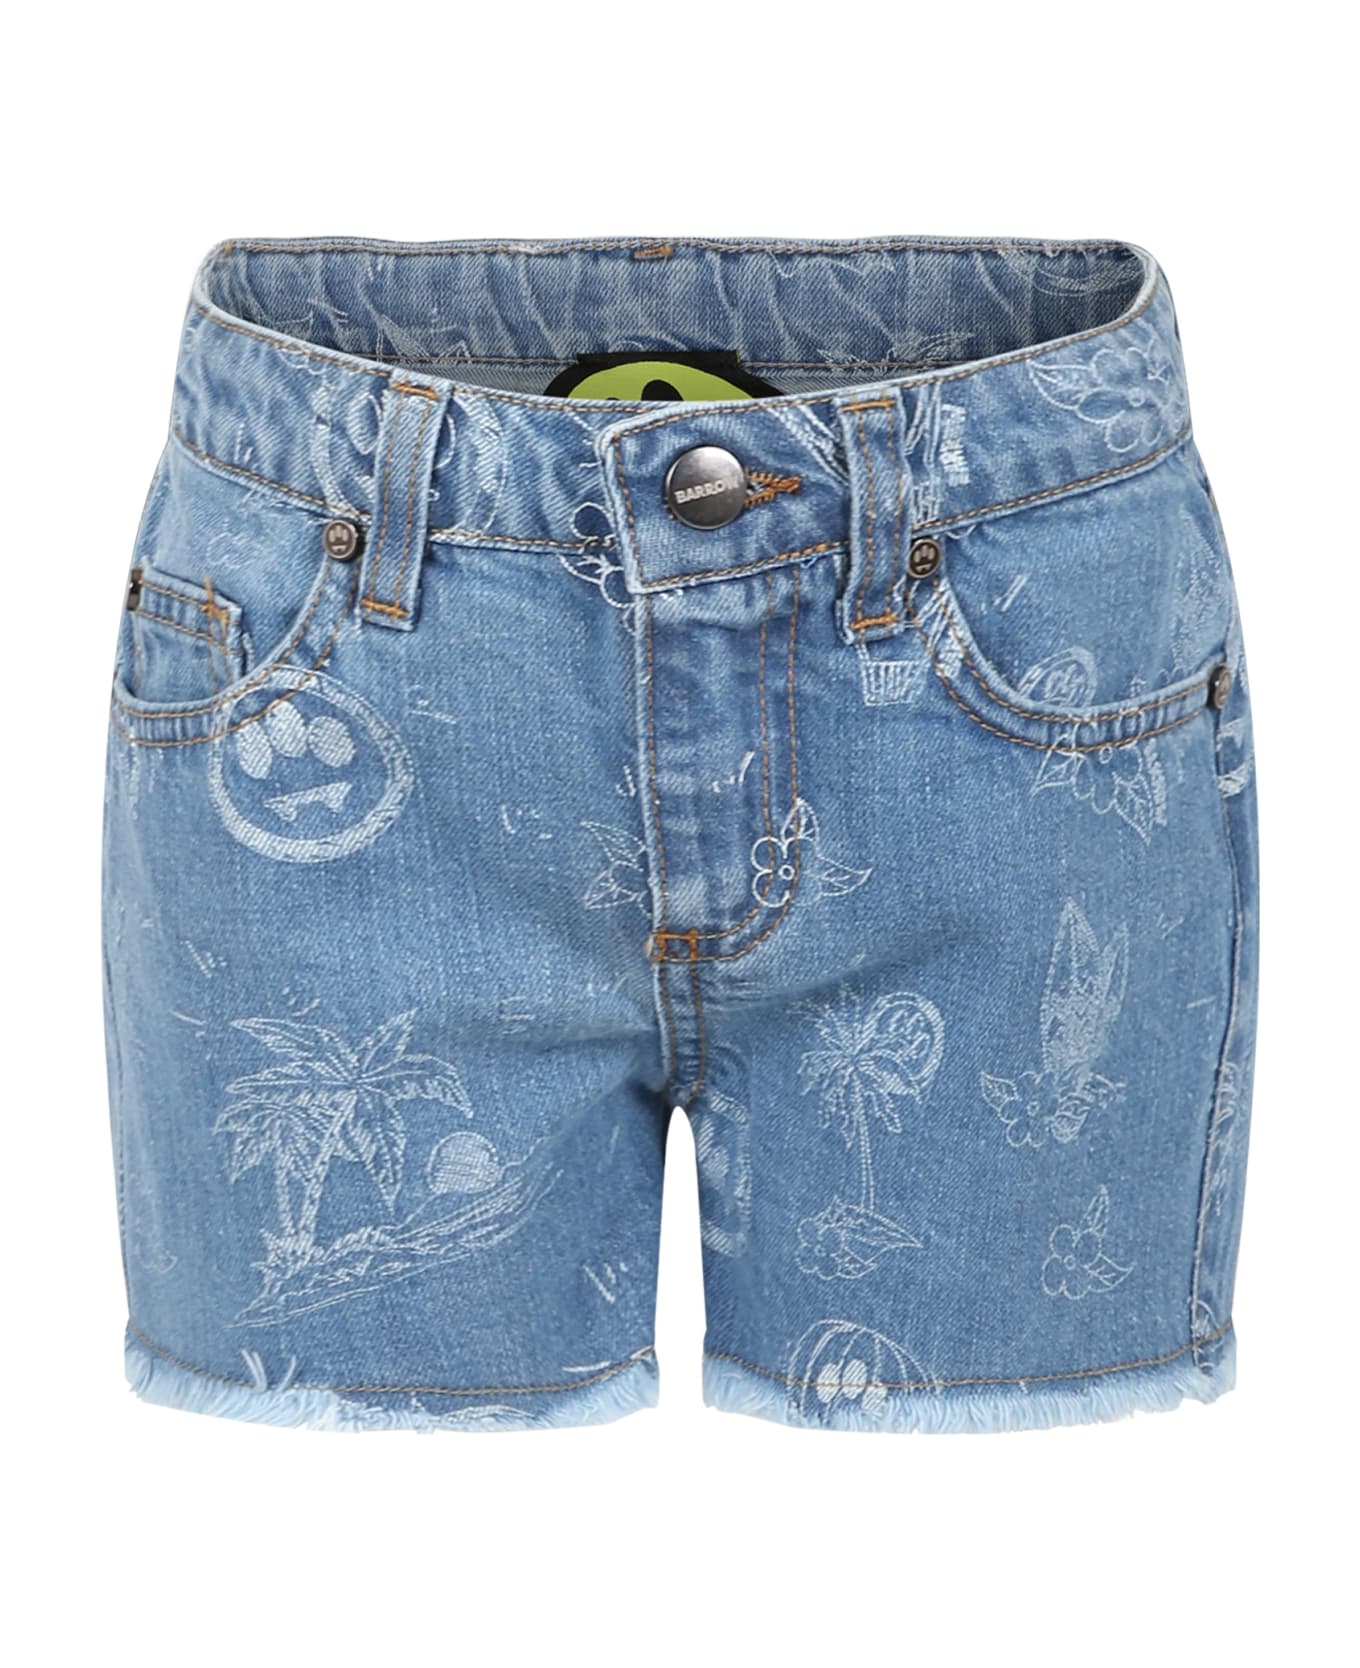 Barrow Light Blue Shorts For Girl With Logo And Iconic Smiley - Denim